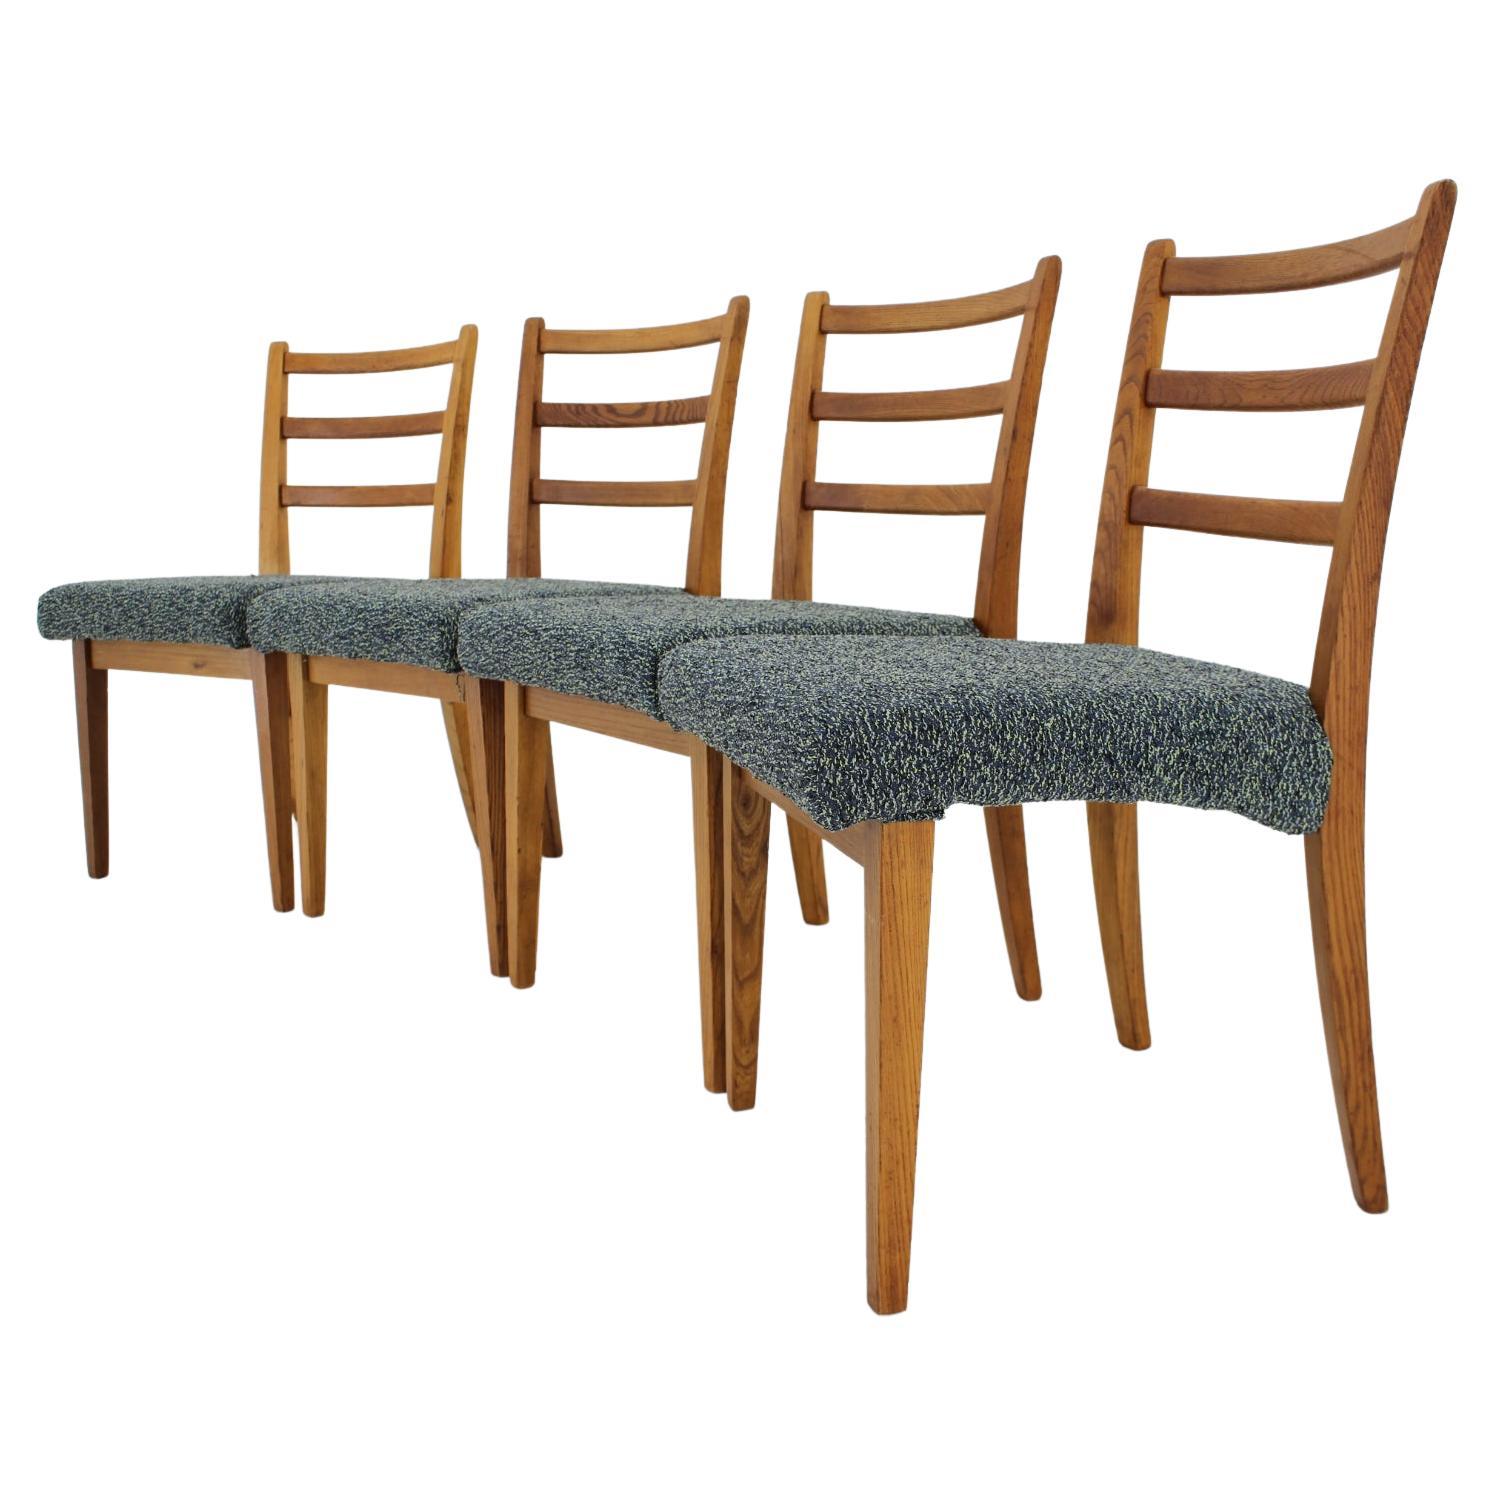 1960s Set of 4 Oak Dining Chairs, Czechoslovakia For Sale